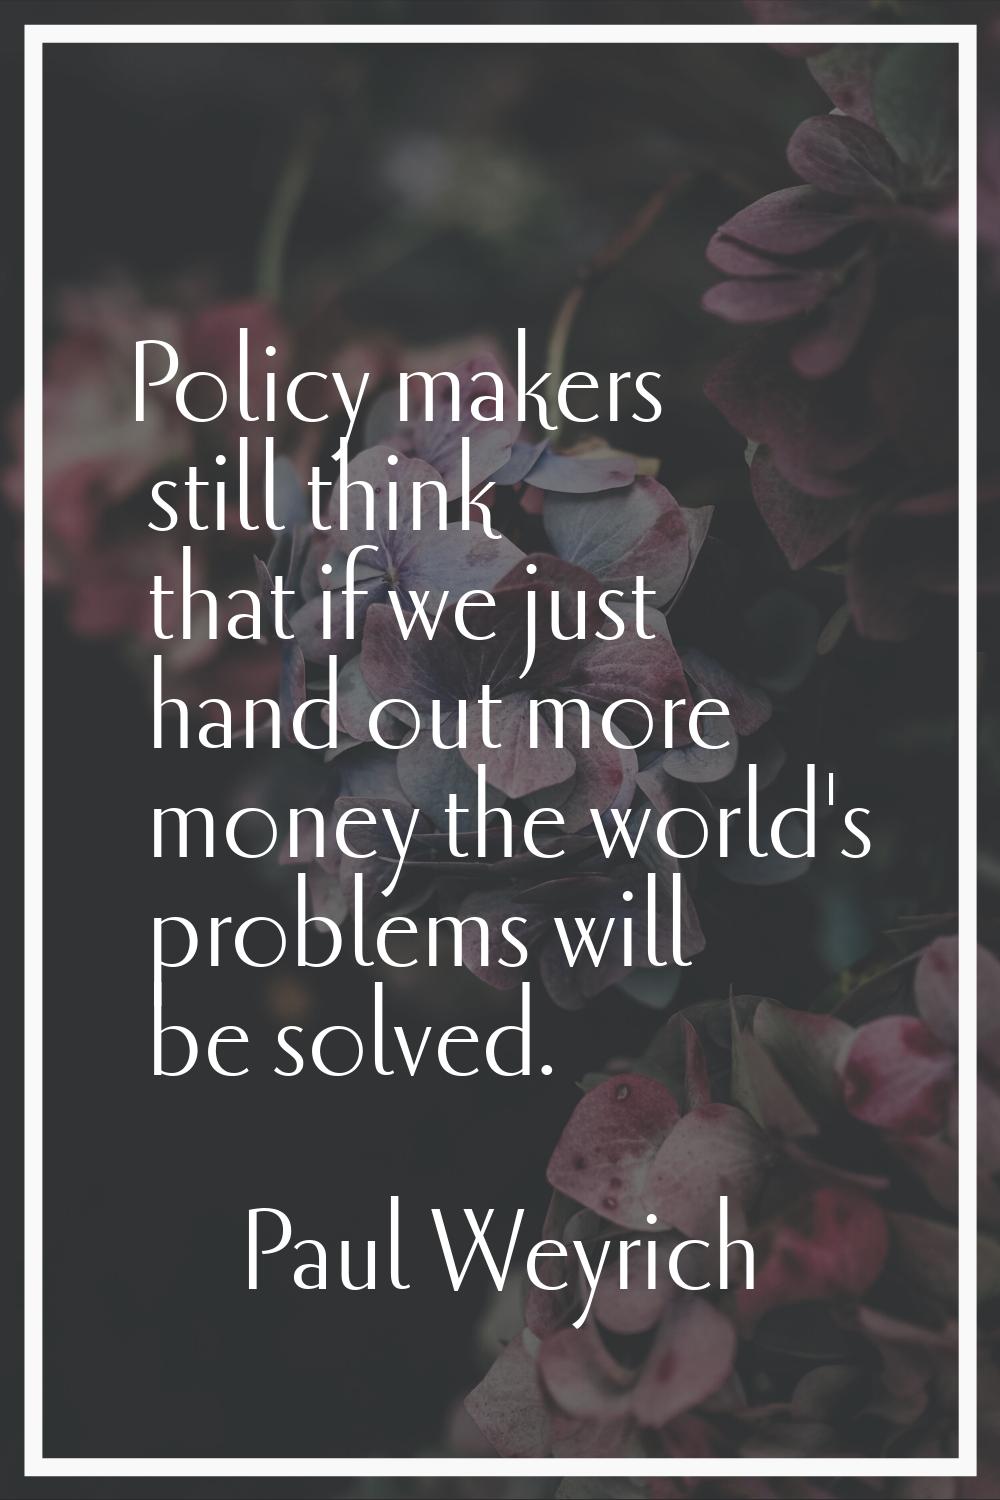 Policy makers still think that if we just hand out more money the world's problems will be solved.